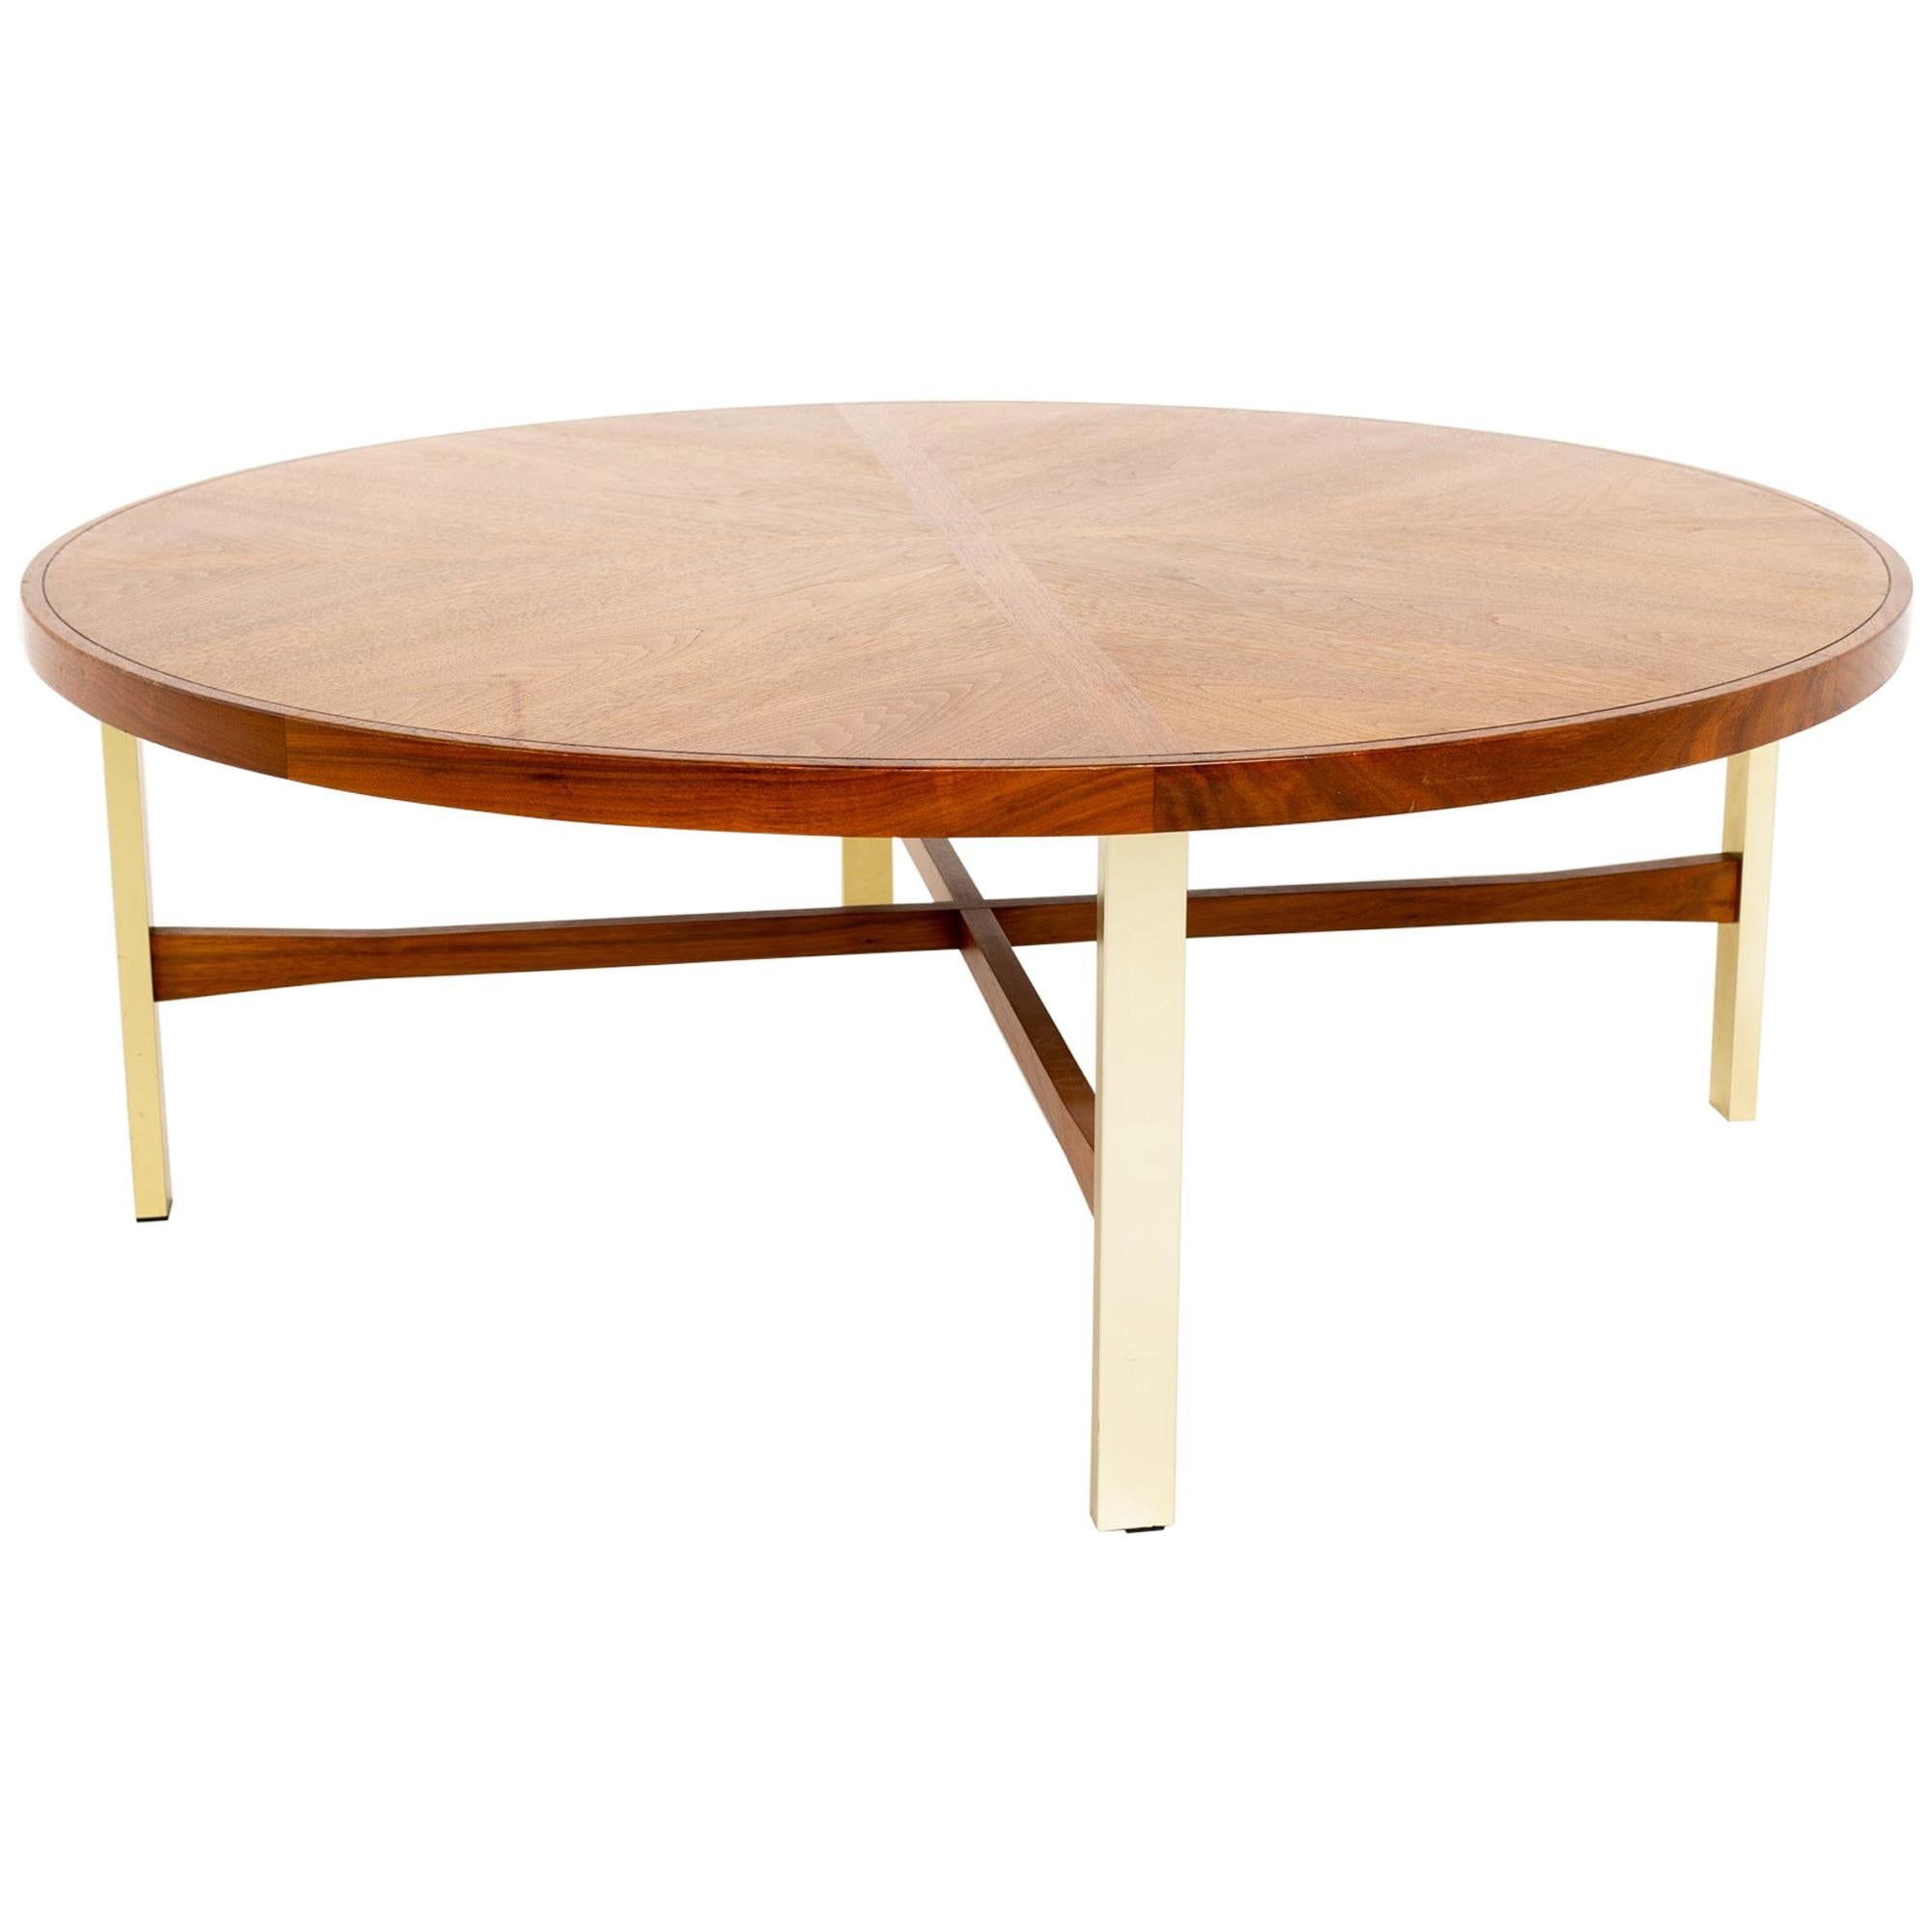 Fashionable American Heritage Round Coffee Tables Throughout Drexel Heritage Mid Century Walnut And Brass Round Coffee Table At 1stdibs (View 13 of 15)